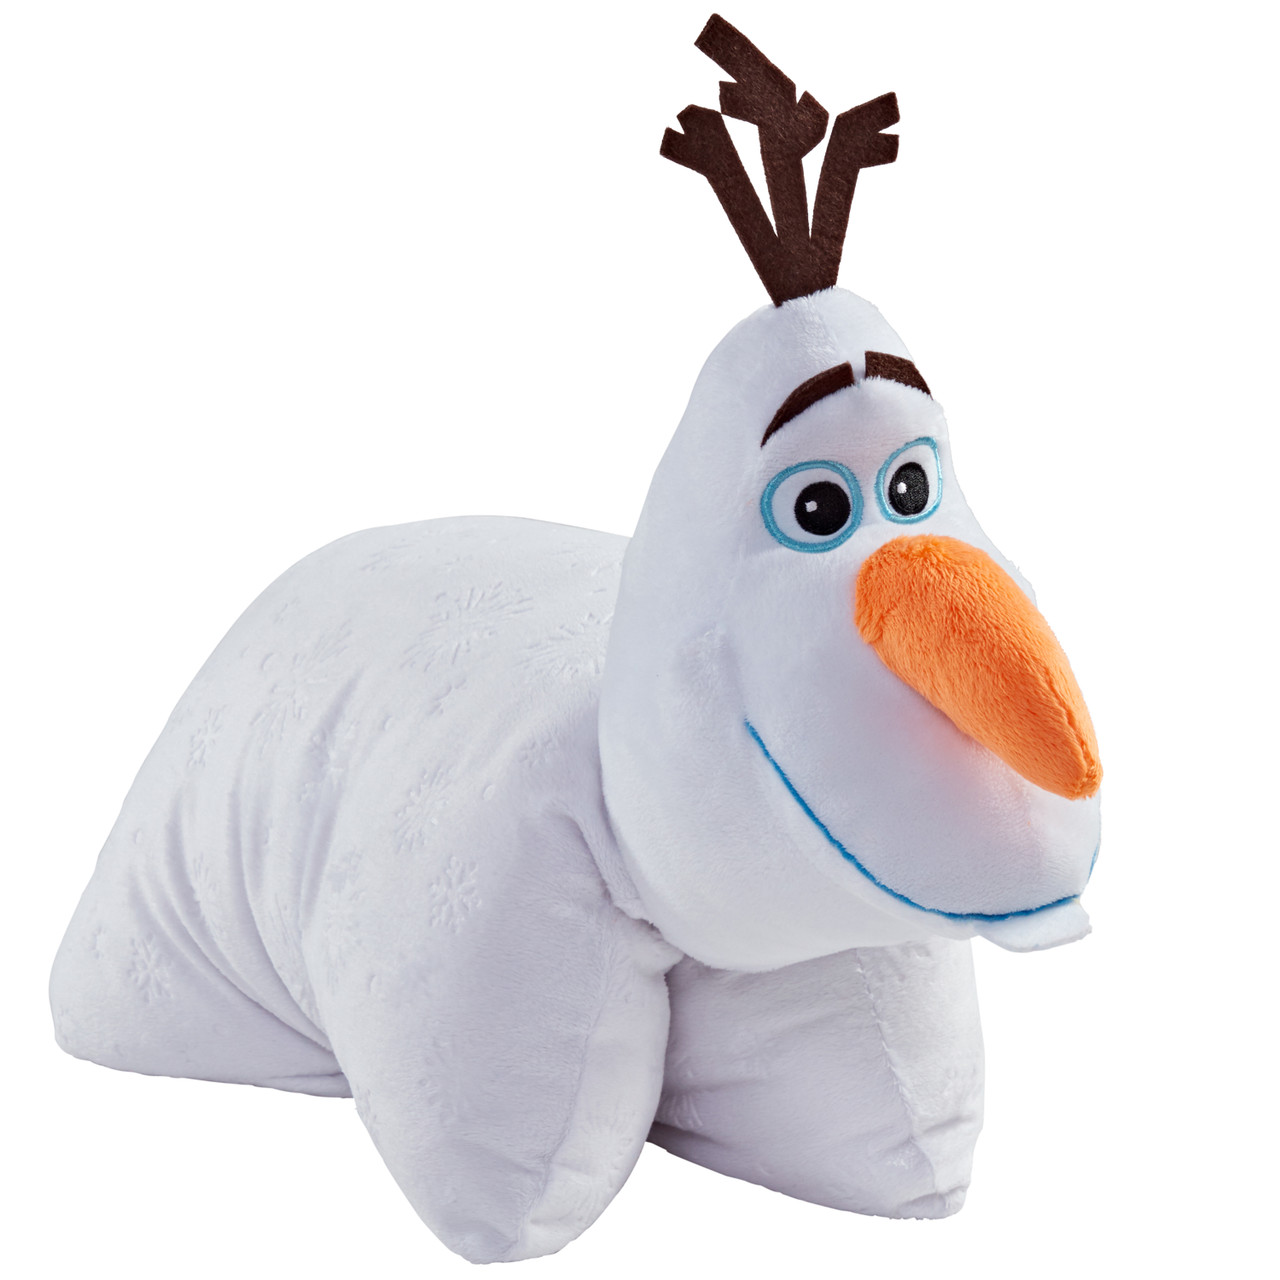 Disney Frozen Olaf Plush Stuffed Animal Toy 12 inches Approximately Very  light Snowflakes on Body and Feet